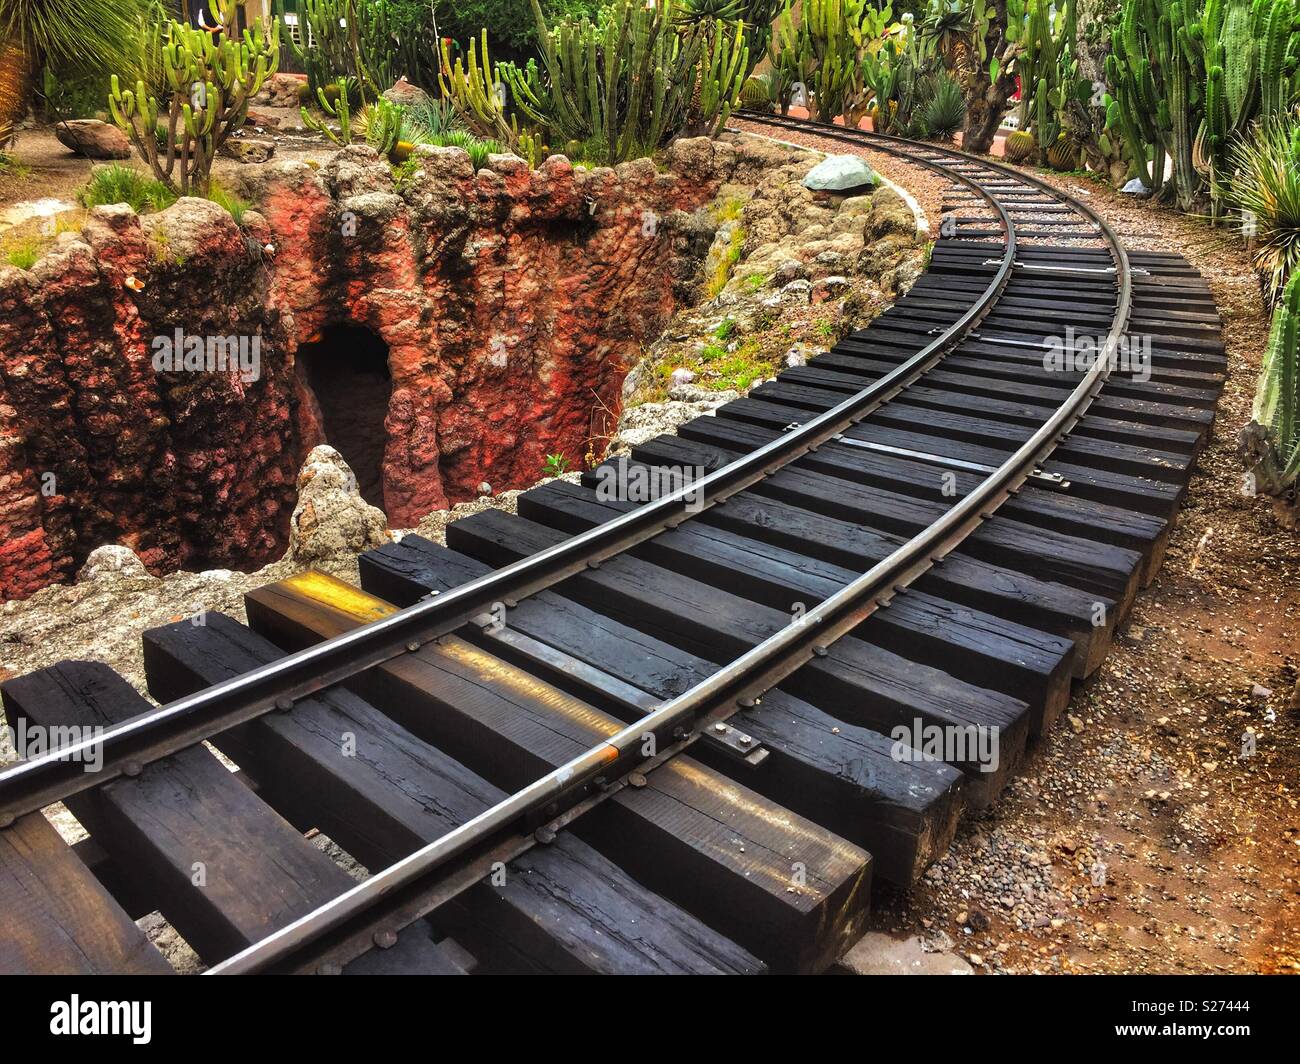 curved train track, timbers, rails, background vegetation in national park Stock Photo